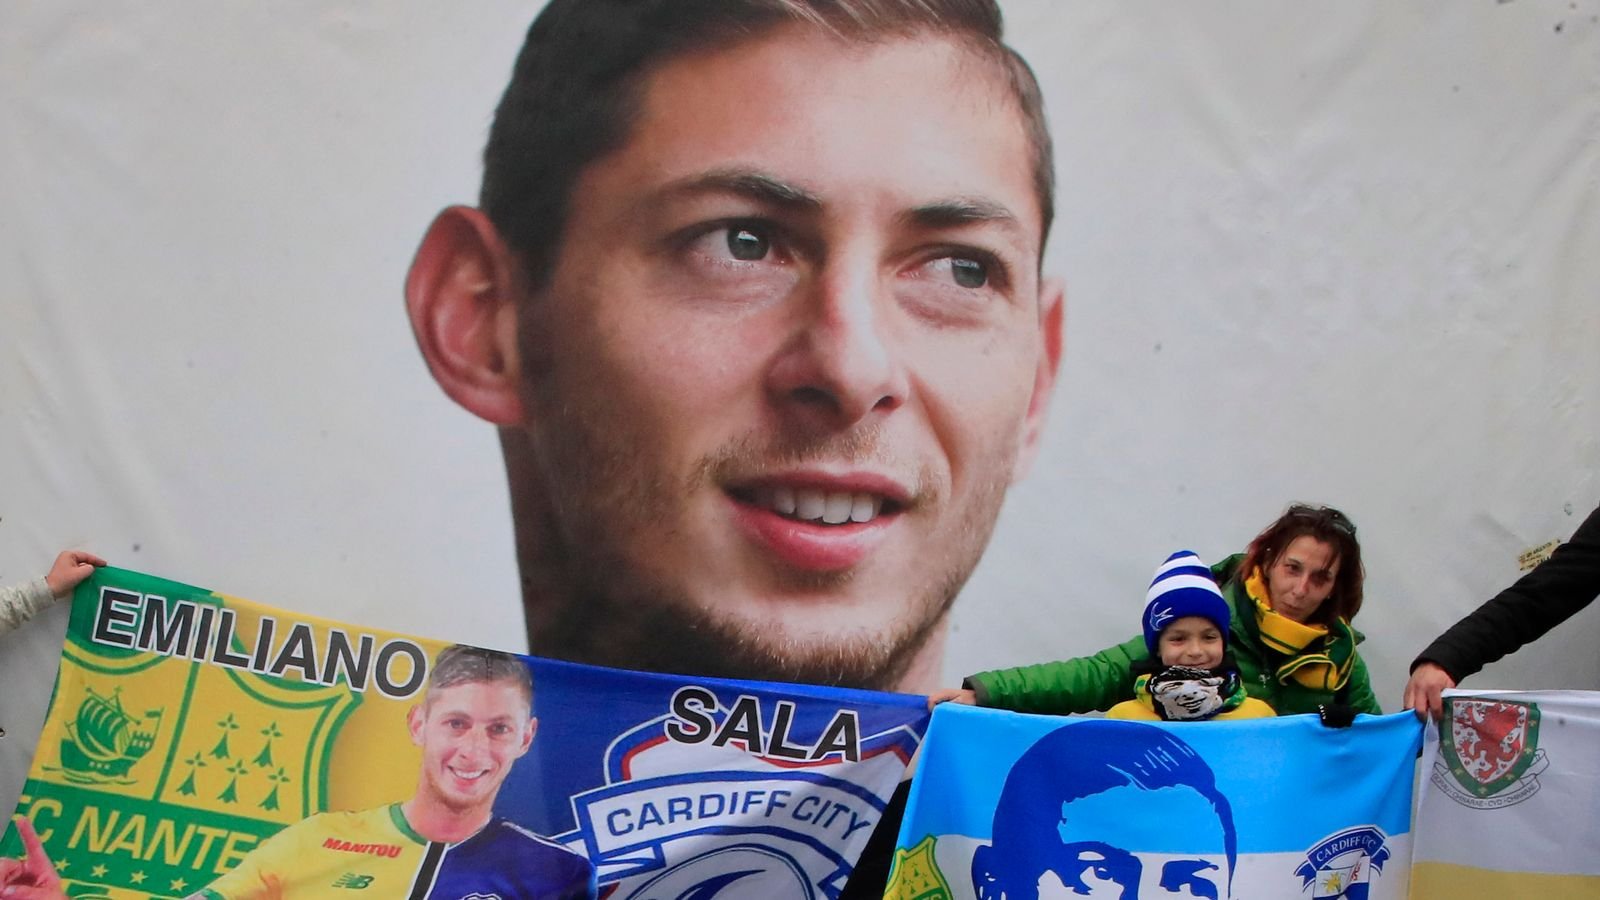 Emiliano Sala: Cardiff City suing football agent Willie McKay five years after plane disaster | Football News